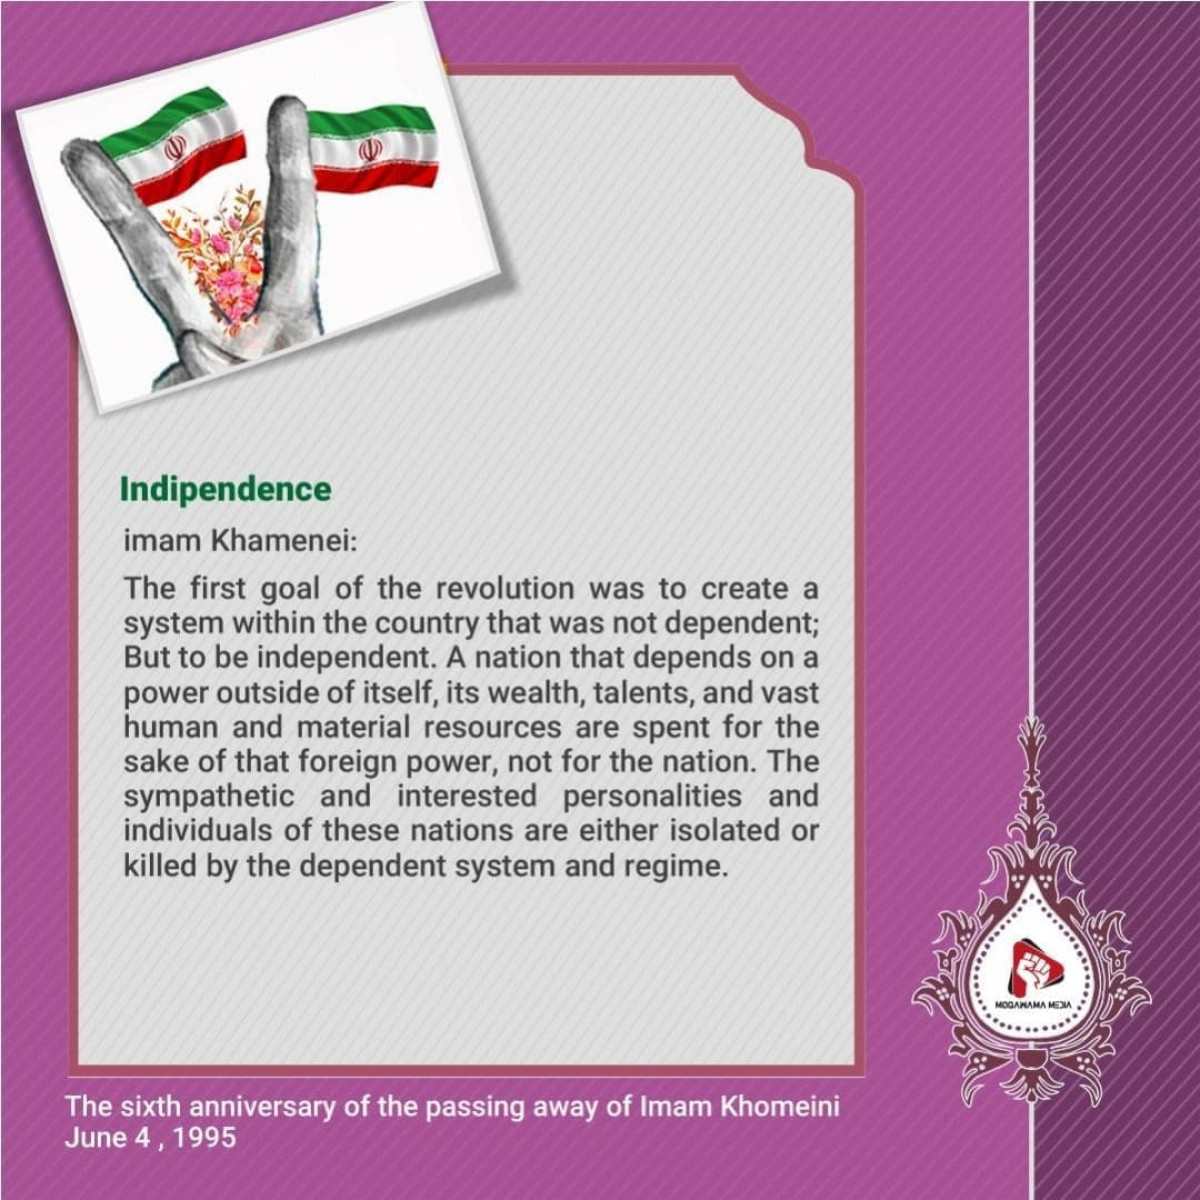 The ideals of the Islamic Revolution Indipendence5